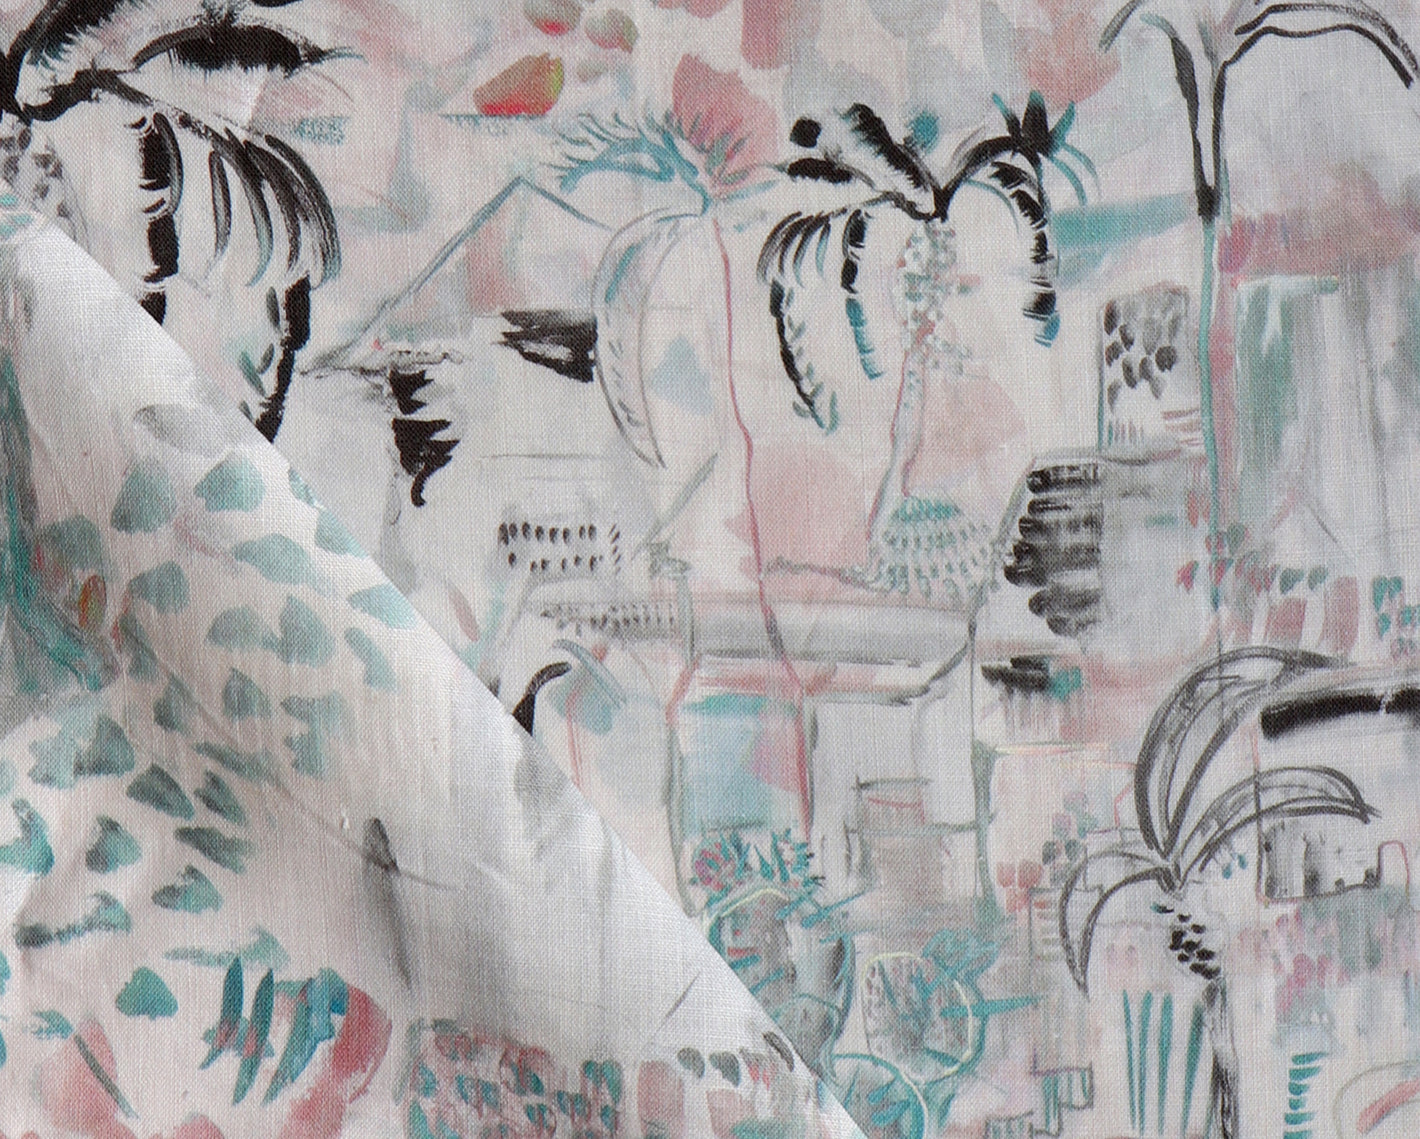 A close up of a pink and blue fabric with palm trees on it